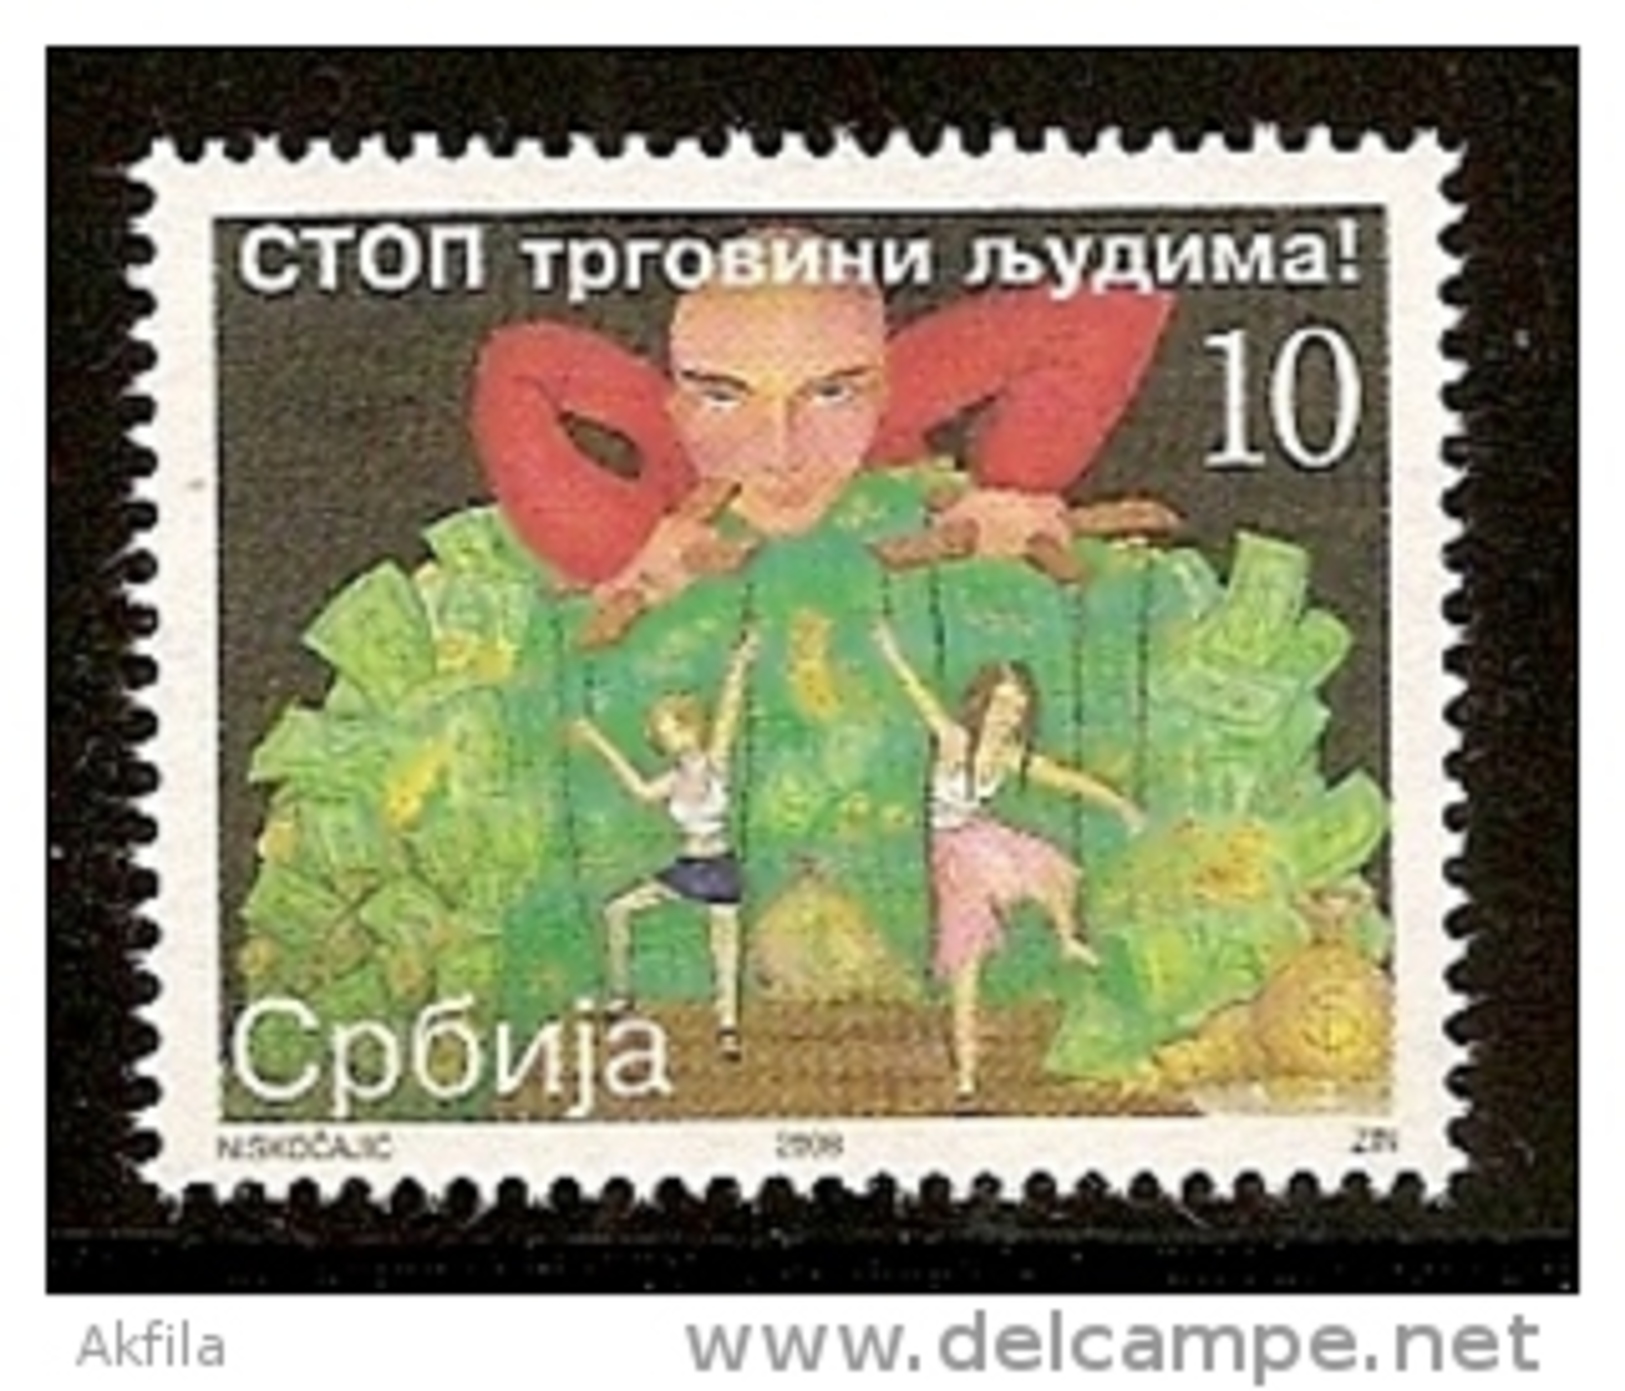 092. Serbia, 2008, Fight Against Trafficking, Surcharge, MNH (**) - Serbia